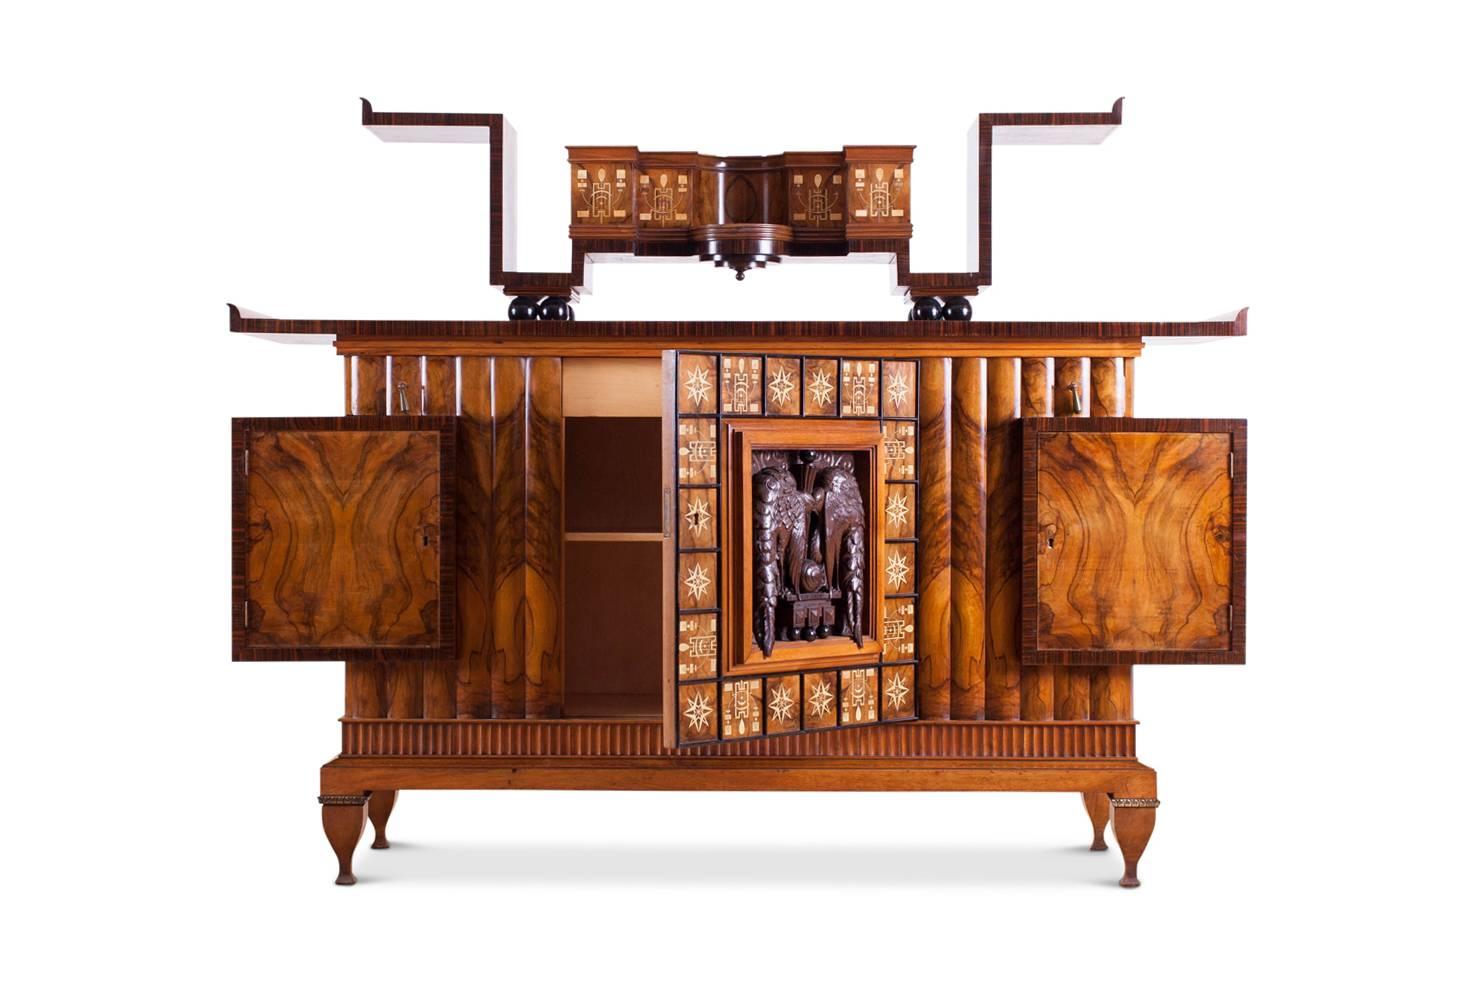 Art Deco Italian exuberance by Osvaldo Borsani.

Extremely decorative piece in walnut, Macassar, ebonized parts and birch inlay
A decorative console rests on top of the sideboard.

A most unusual and high-end Milanese piece from circa